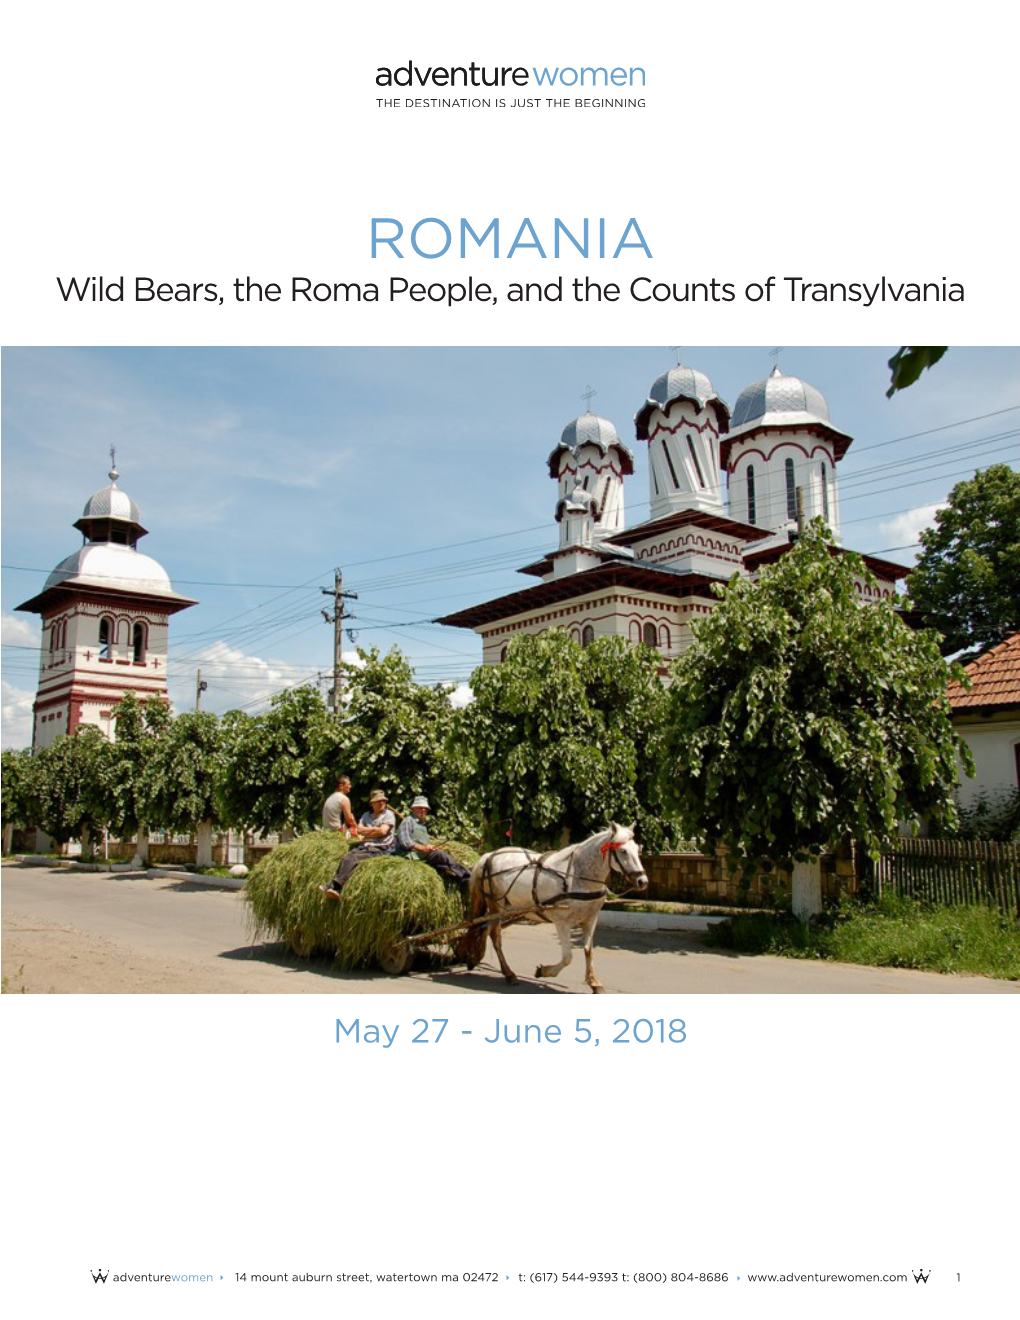 ROMANIA Wild Bears, the Roma People, and the Counts of Transylvania